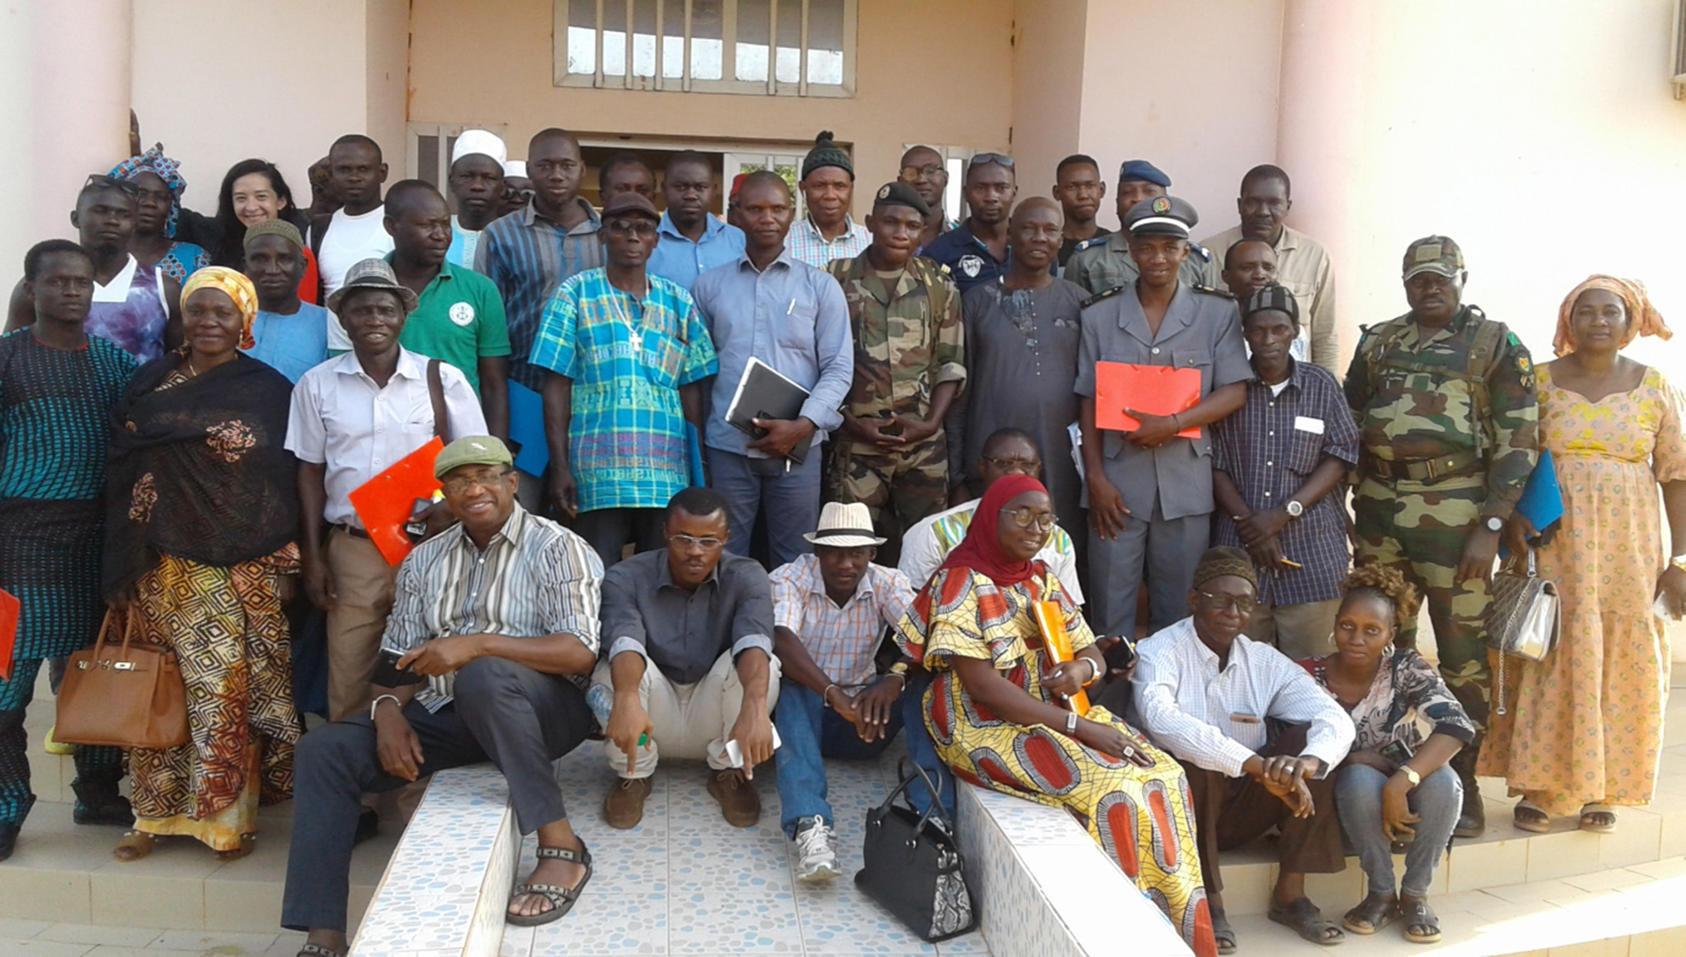 Justice and Security Dialogue participants in Casamance pose for a group photo after first session, March 5, 2020. (Pierre Ndecky/USIP)